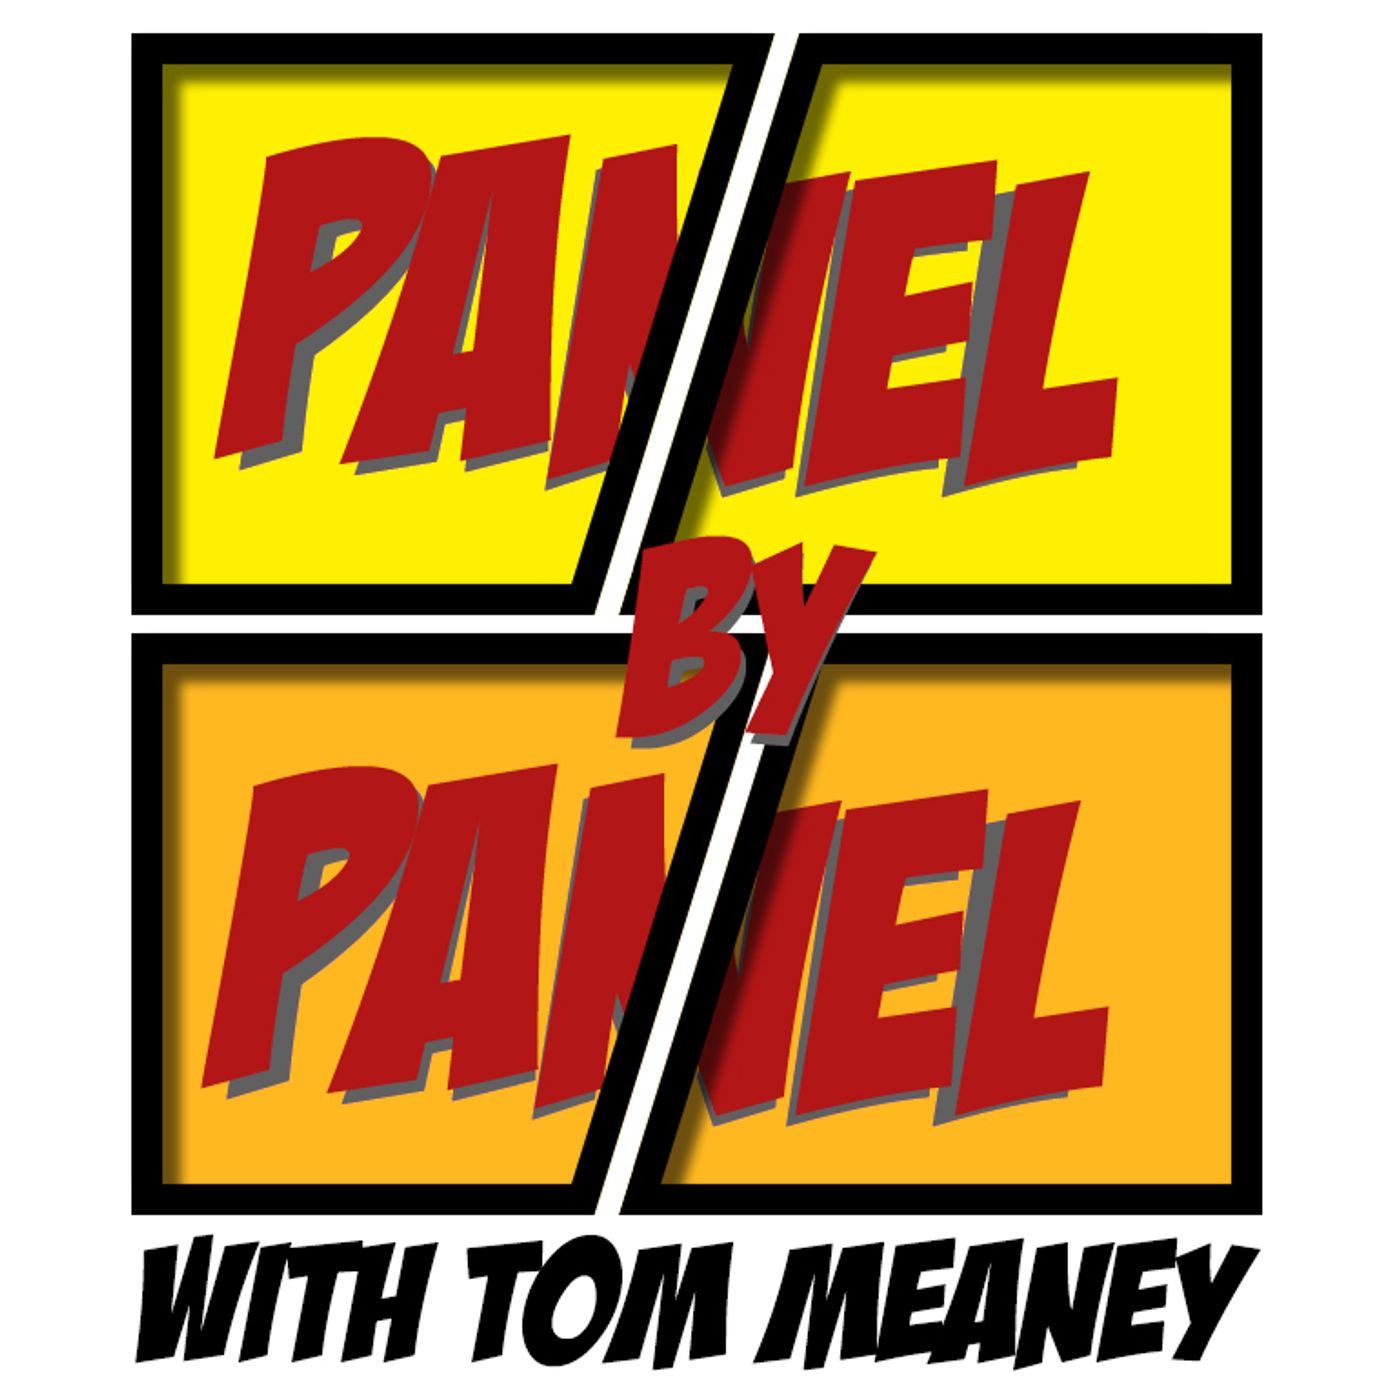 Panel By Panel with Tom Meaney